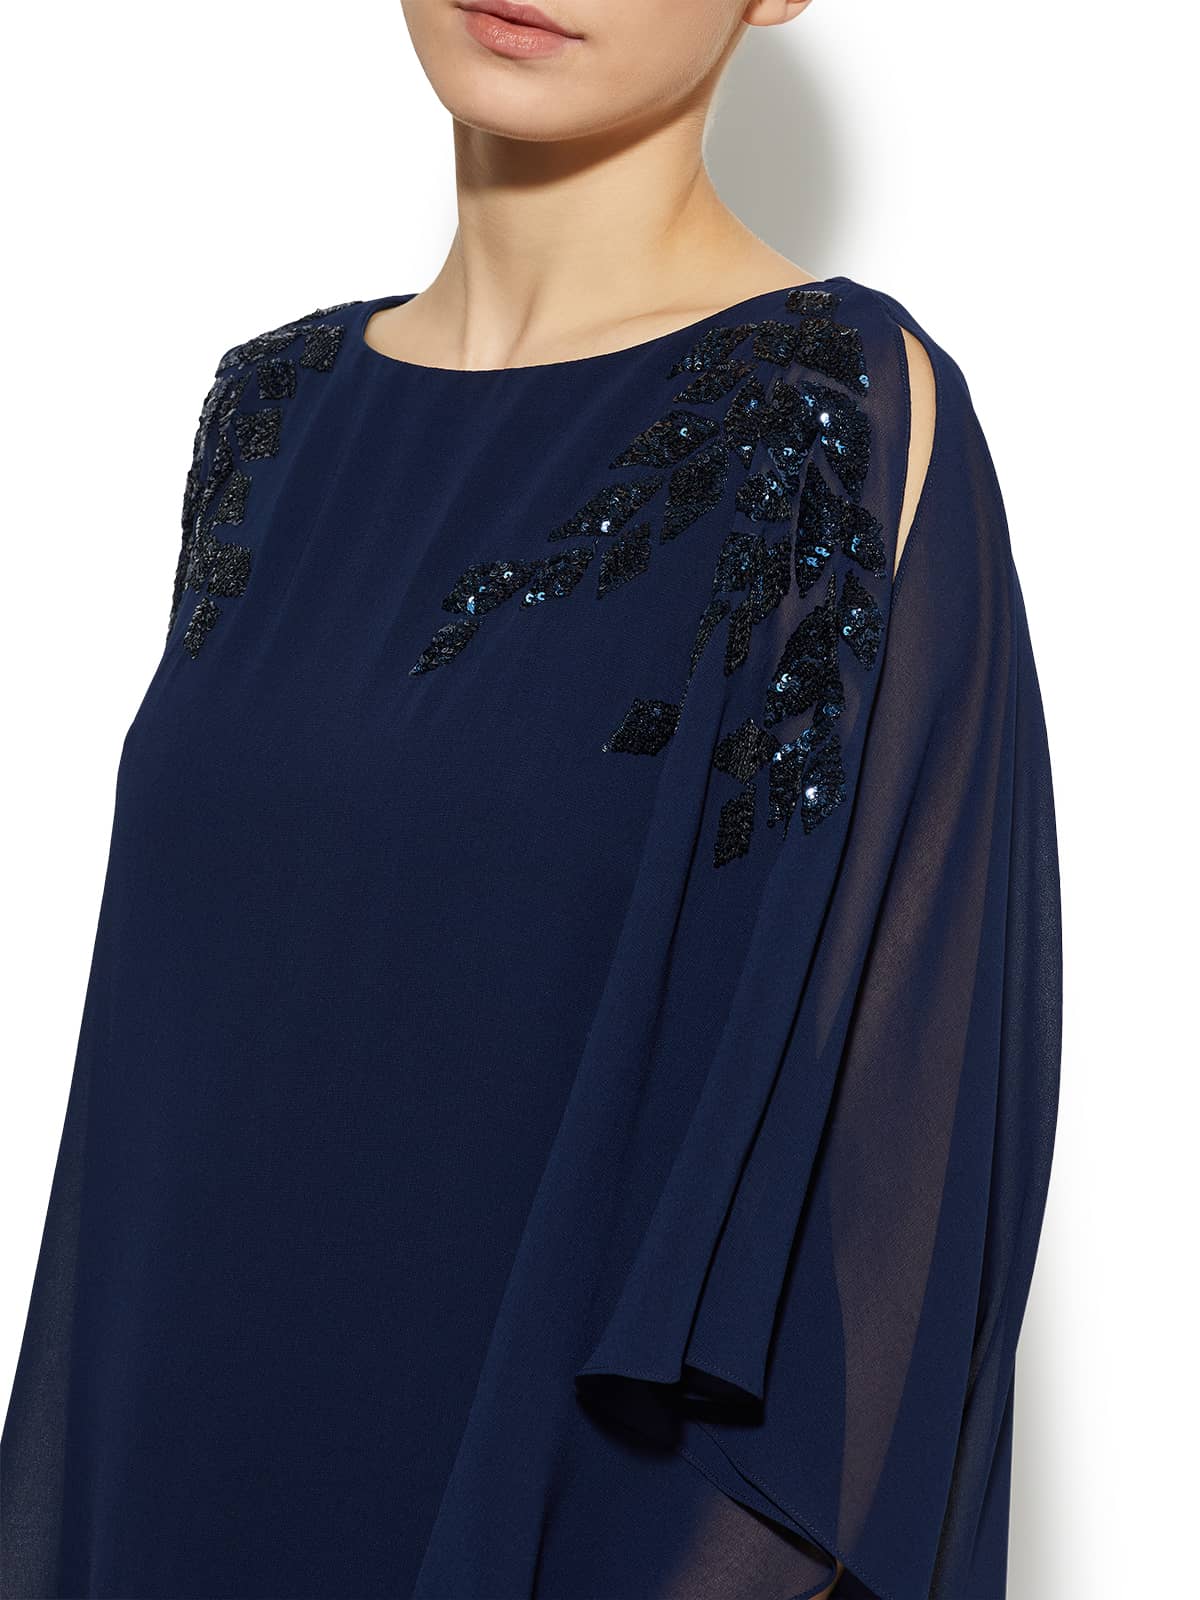 Celine Navy Sequin Chiffon Overlay Dress by Montique